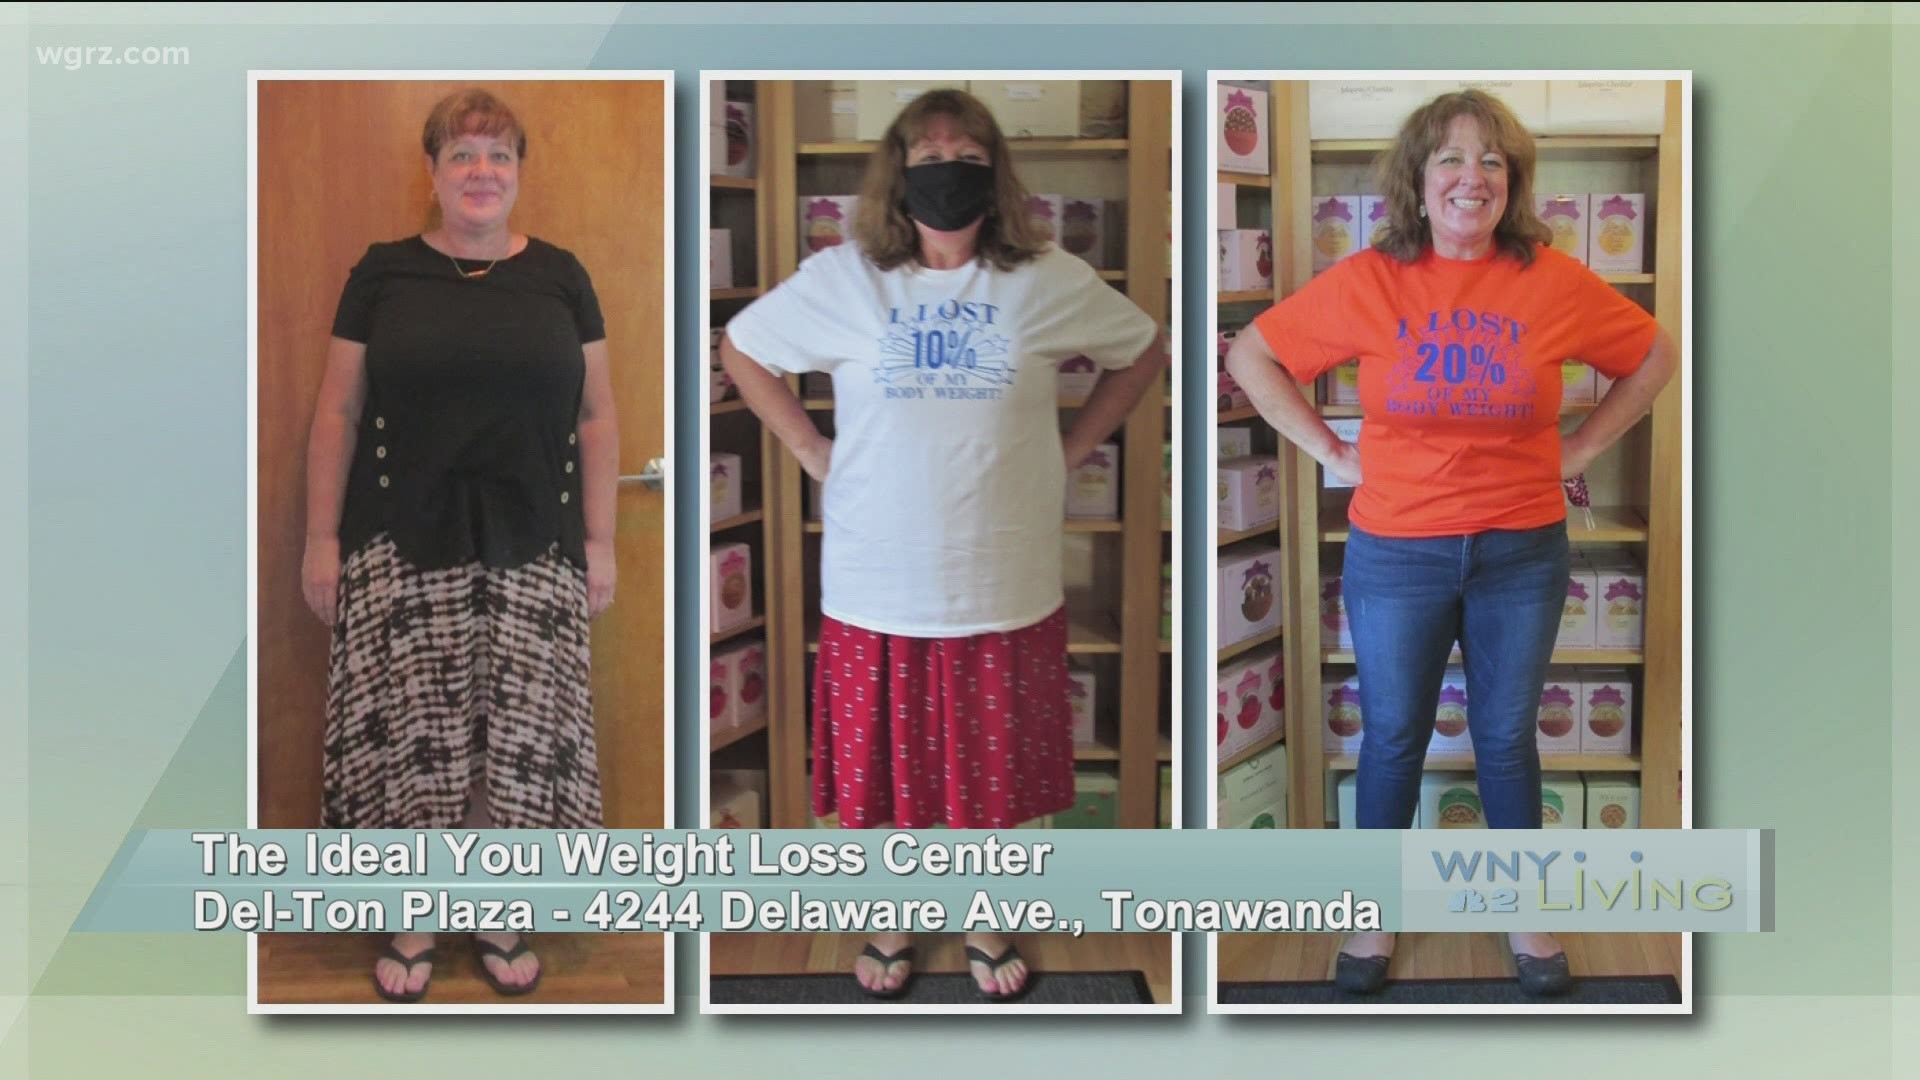 WNY Living - January 2 - The Ideal You Weight Loss Center (THIS VIDEO IS SPONSORED BY THE IDEAL YOU WEIGHT LOSS CENTER)